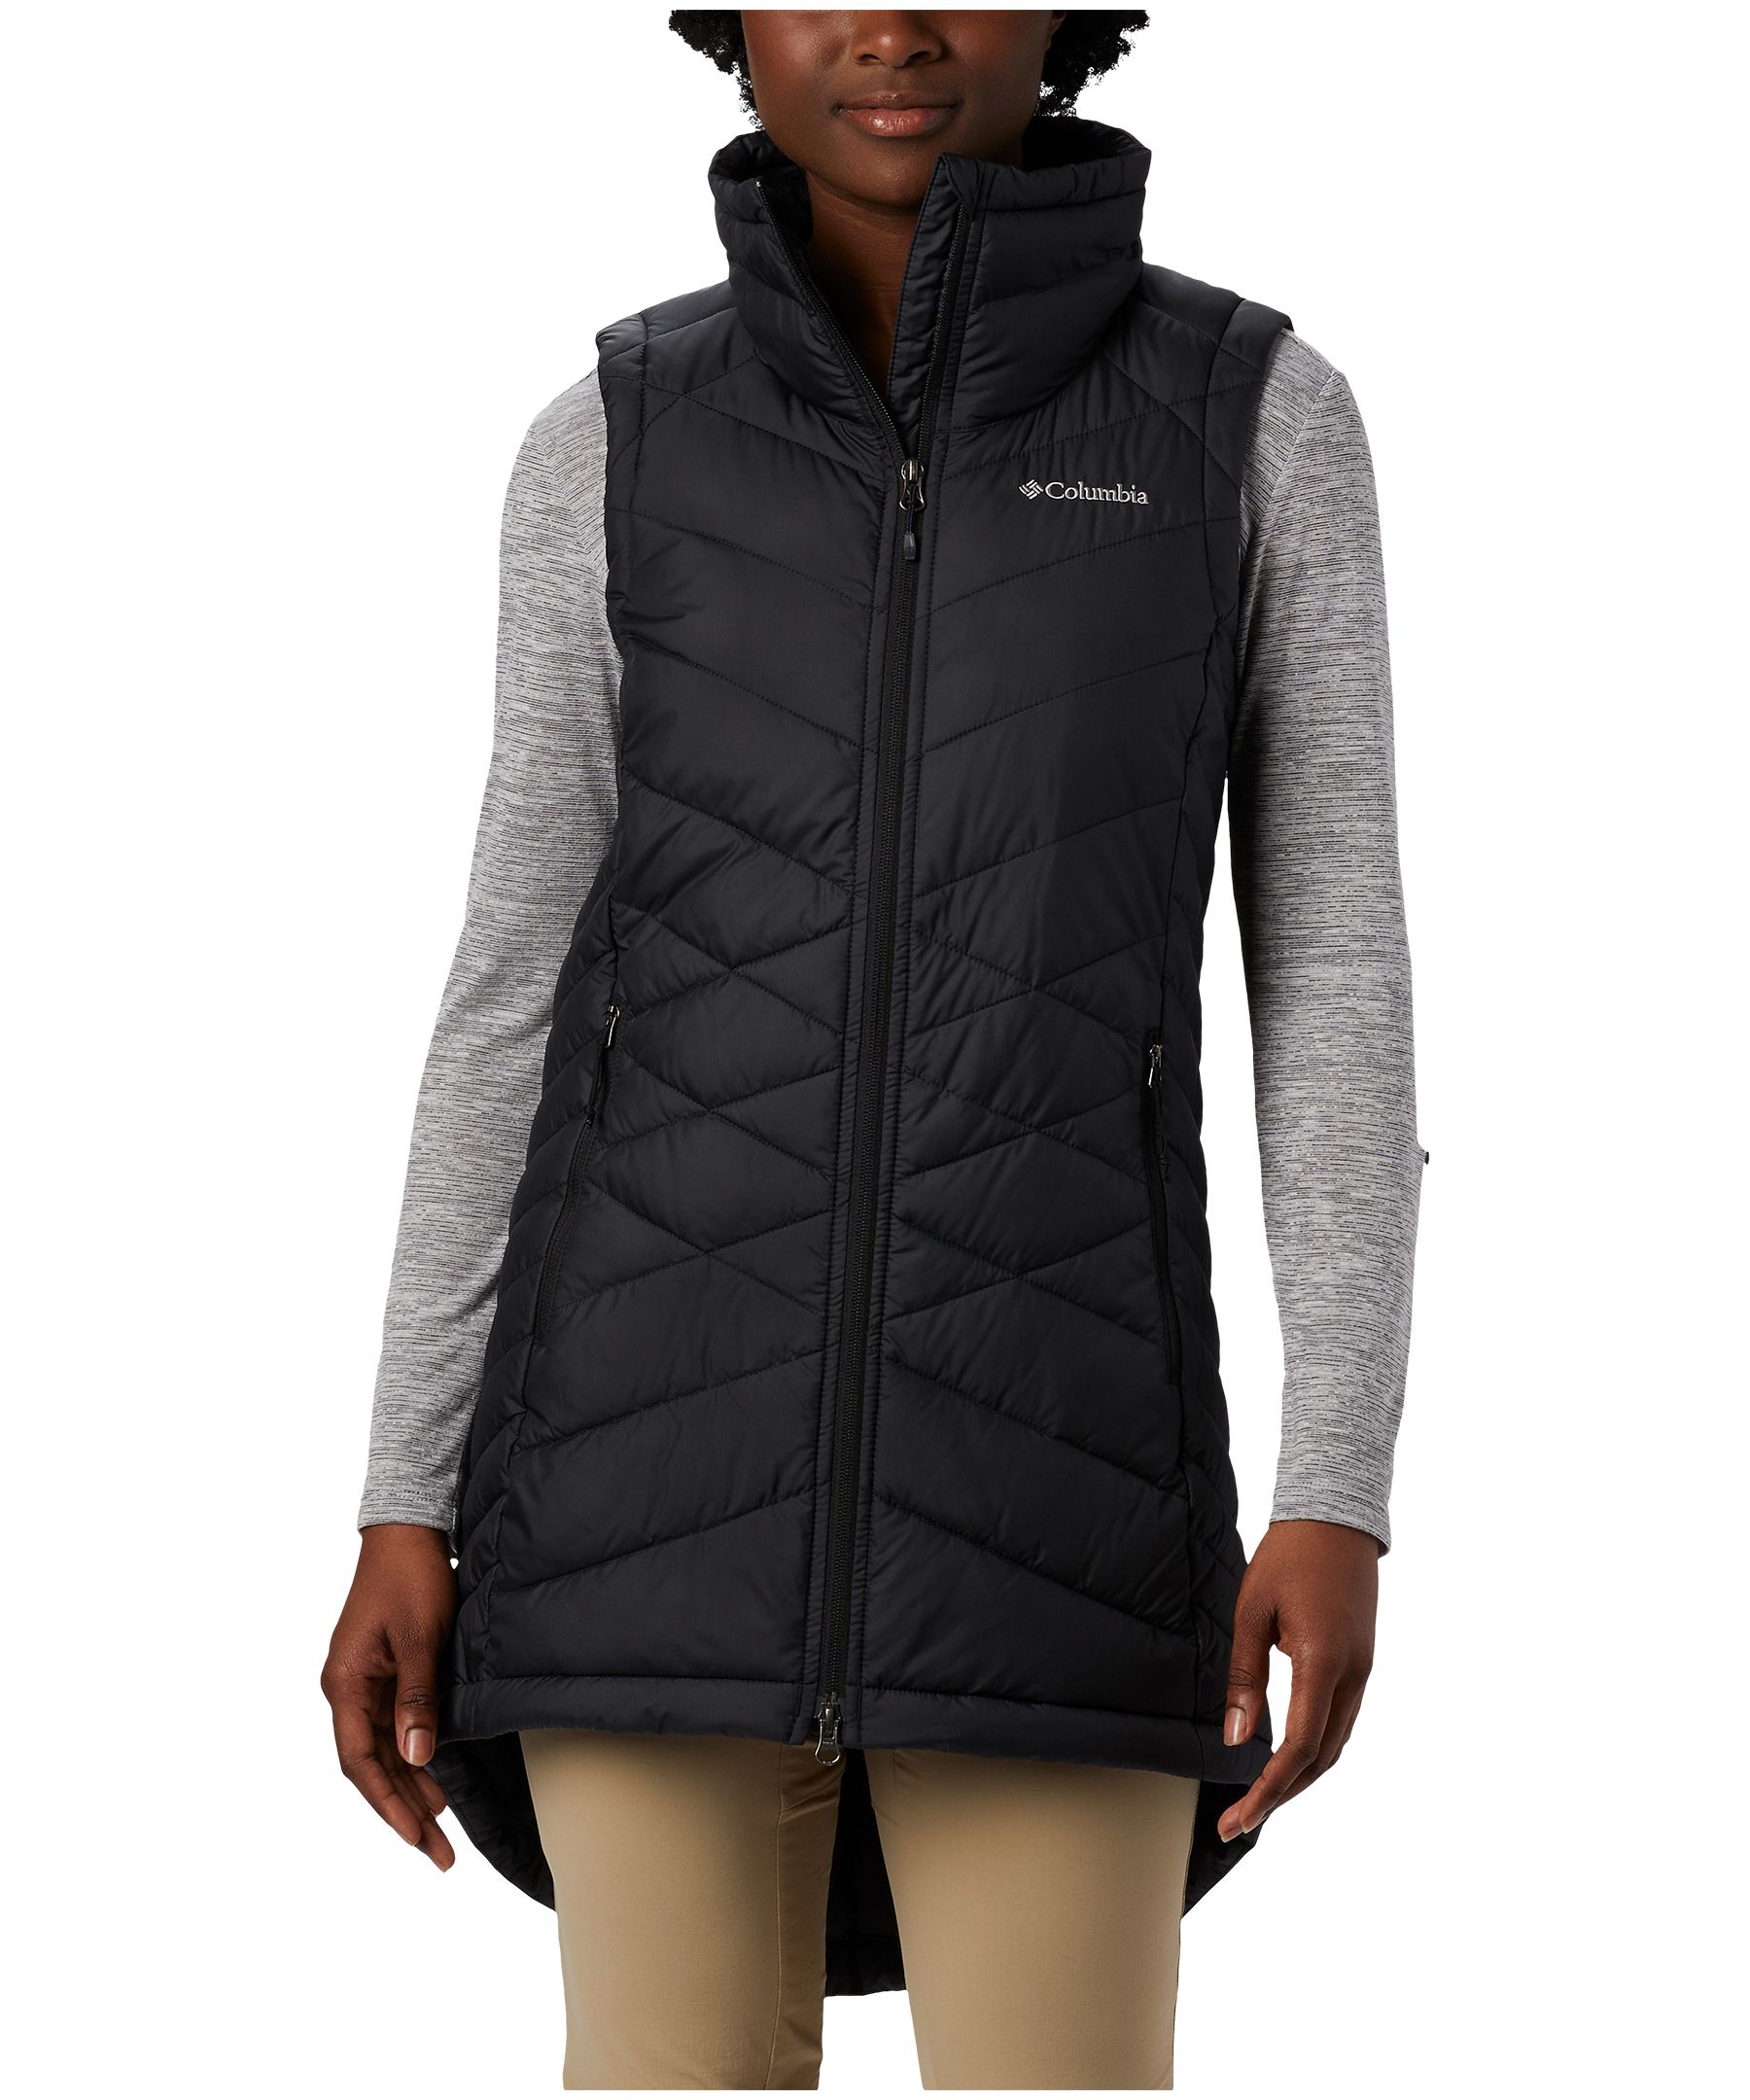 Columbia Women's Heavenly Vest, Insulated, Semi-Fitted, Winter